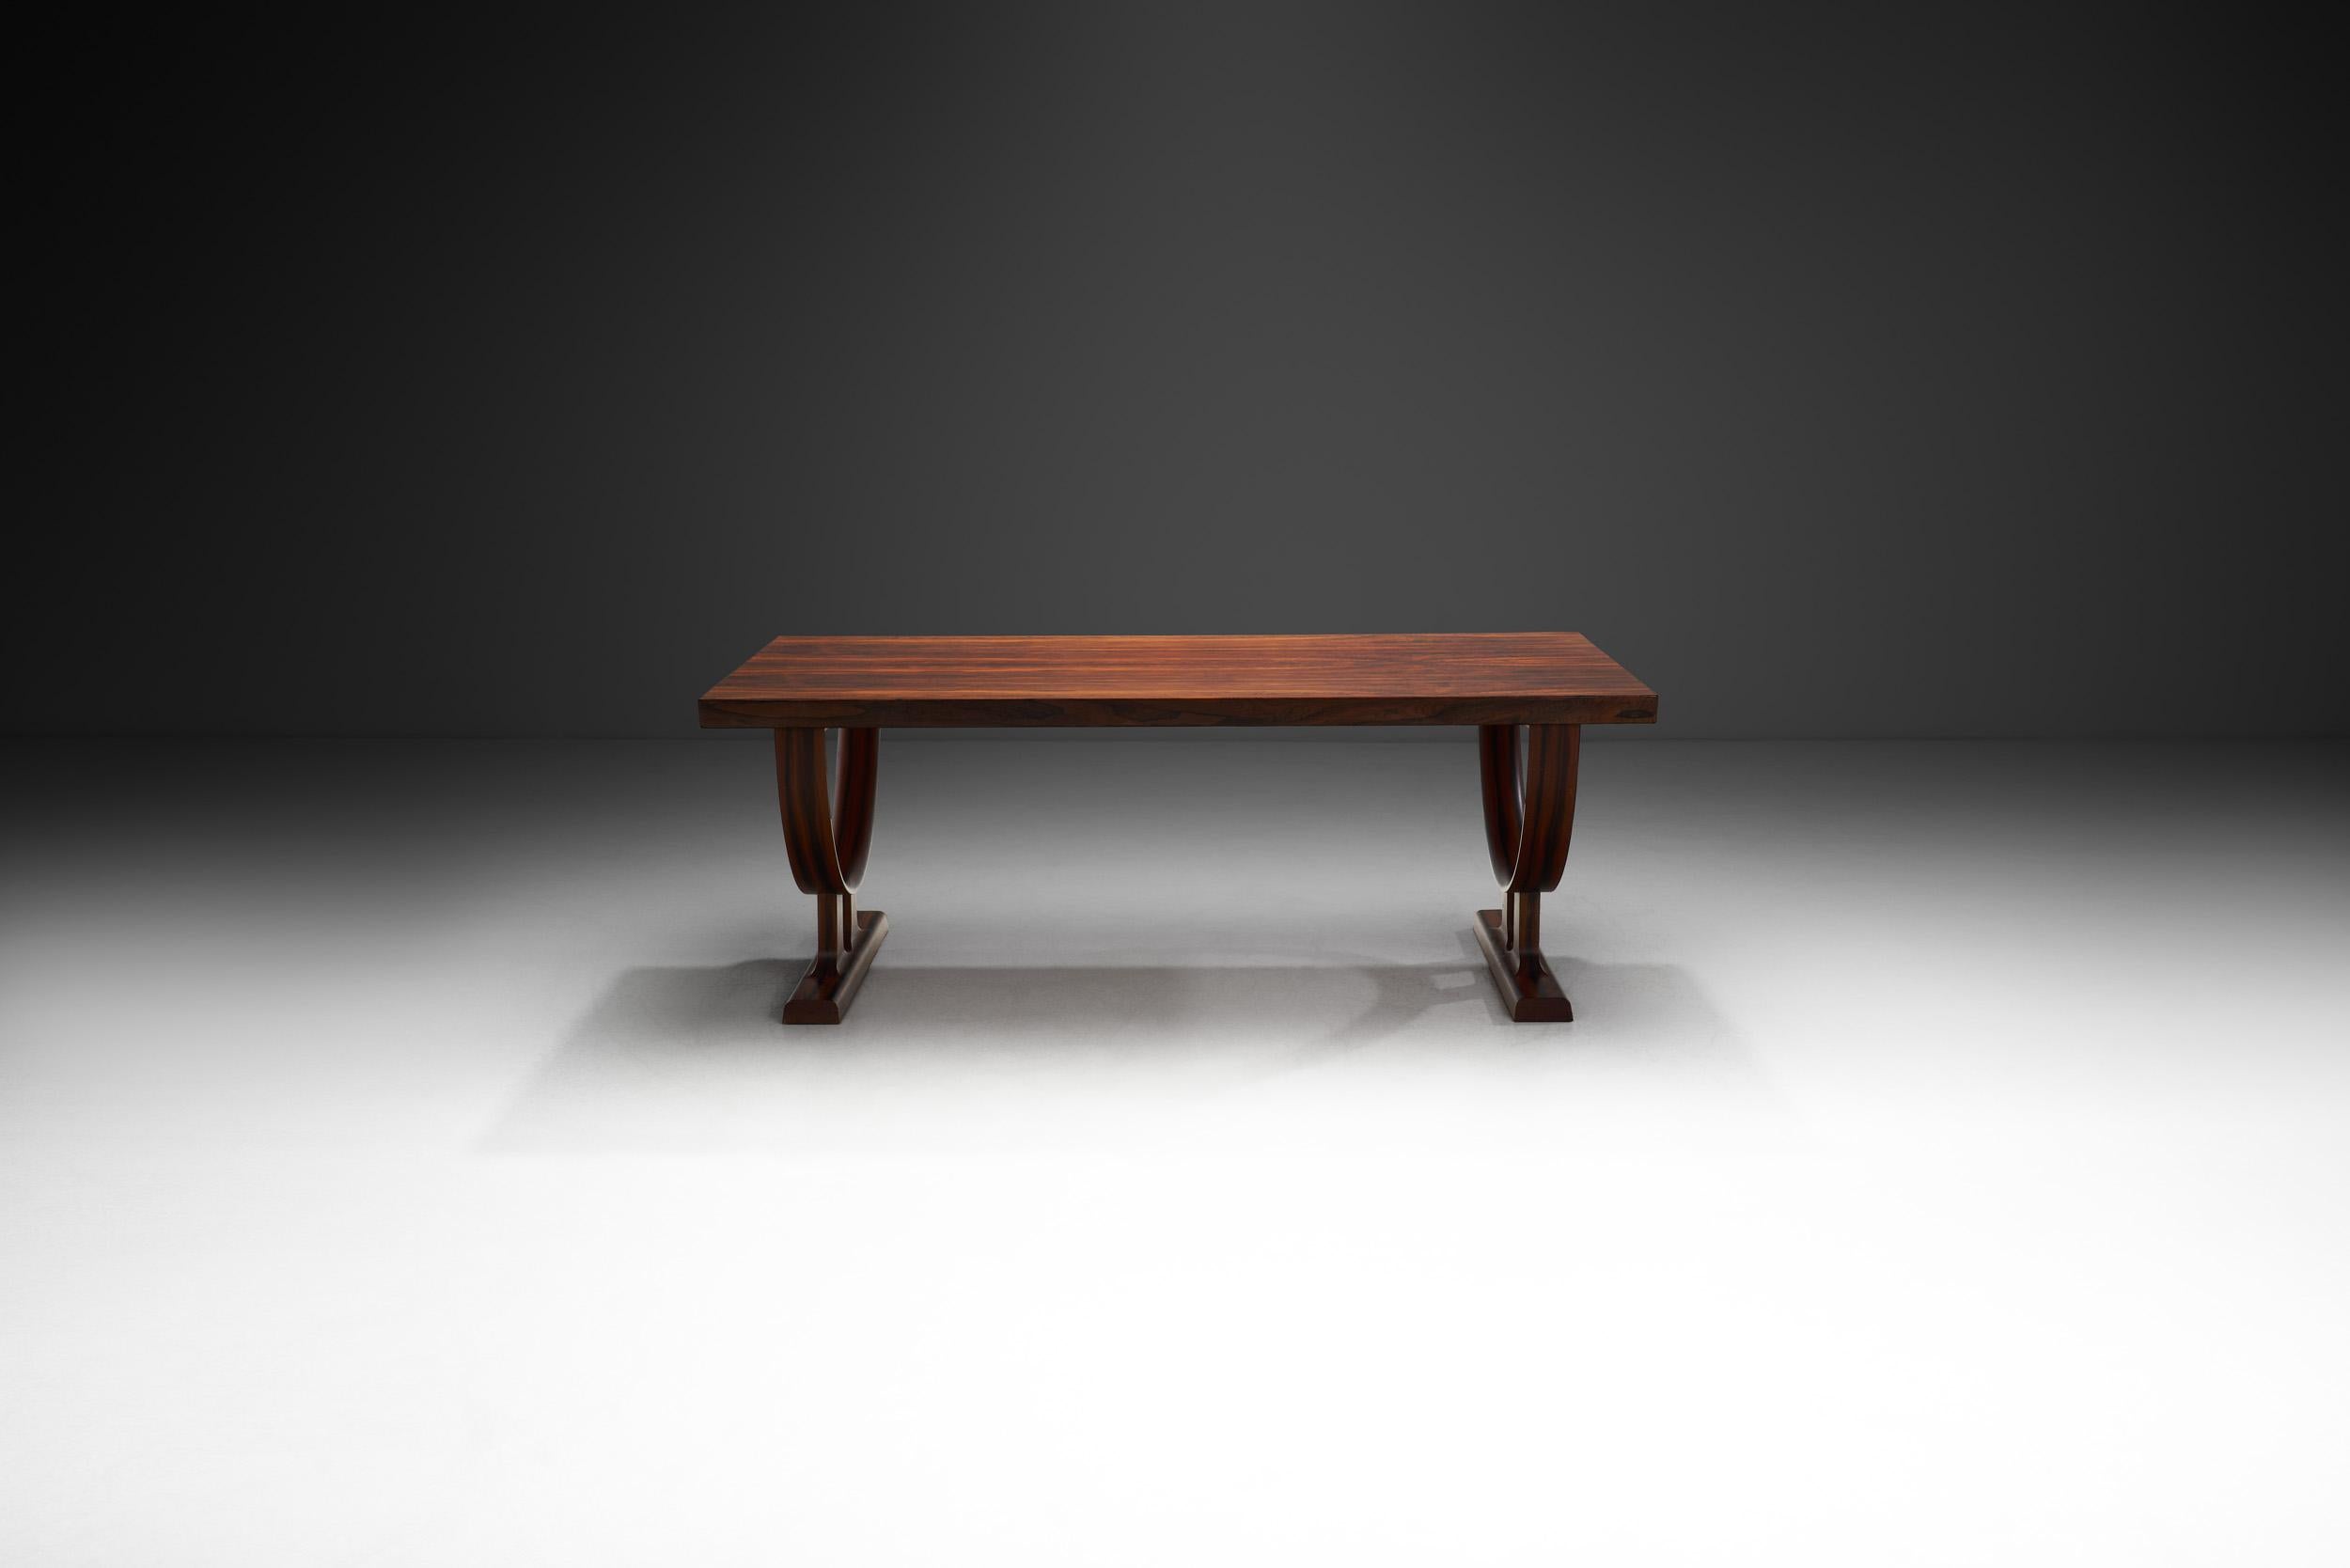 Scandinavian Solid Wood Table with Circular Trestle Base, Scandinavia, 1970s For Sale